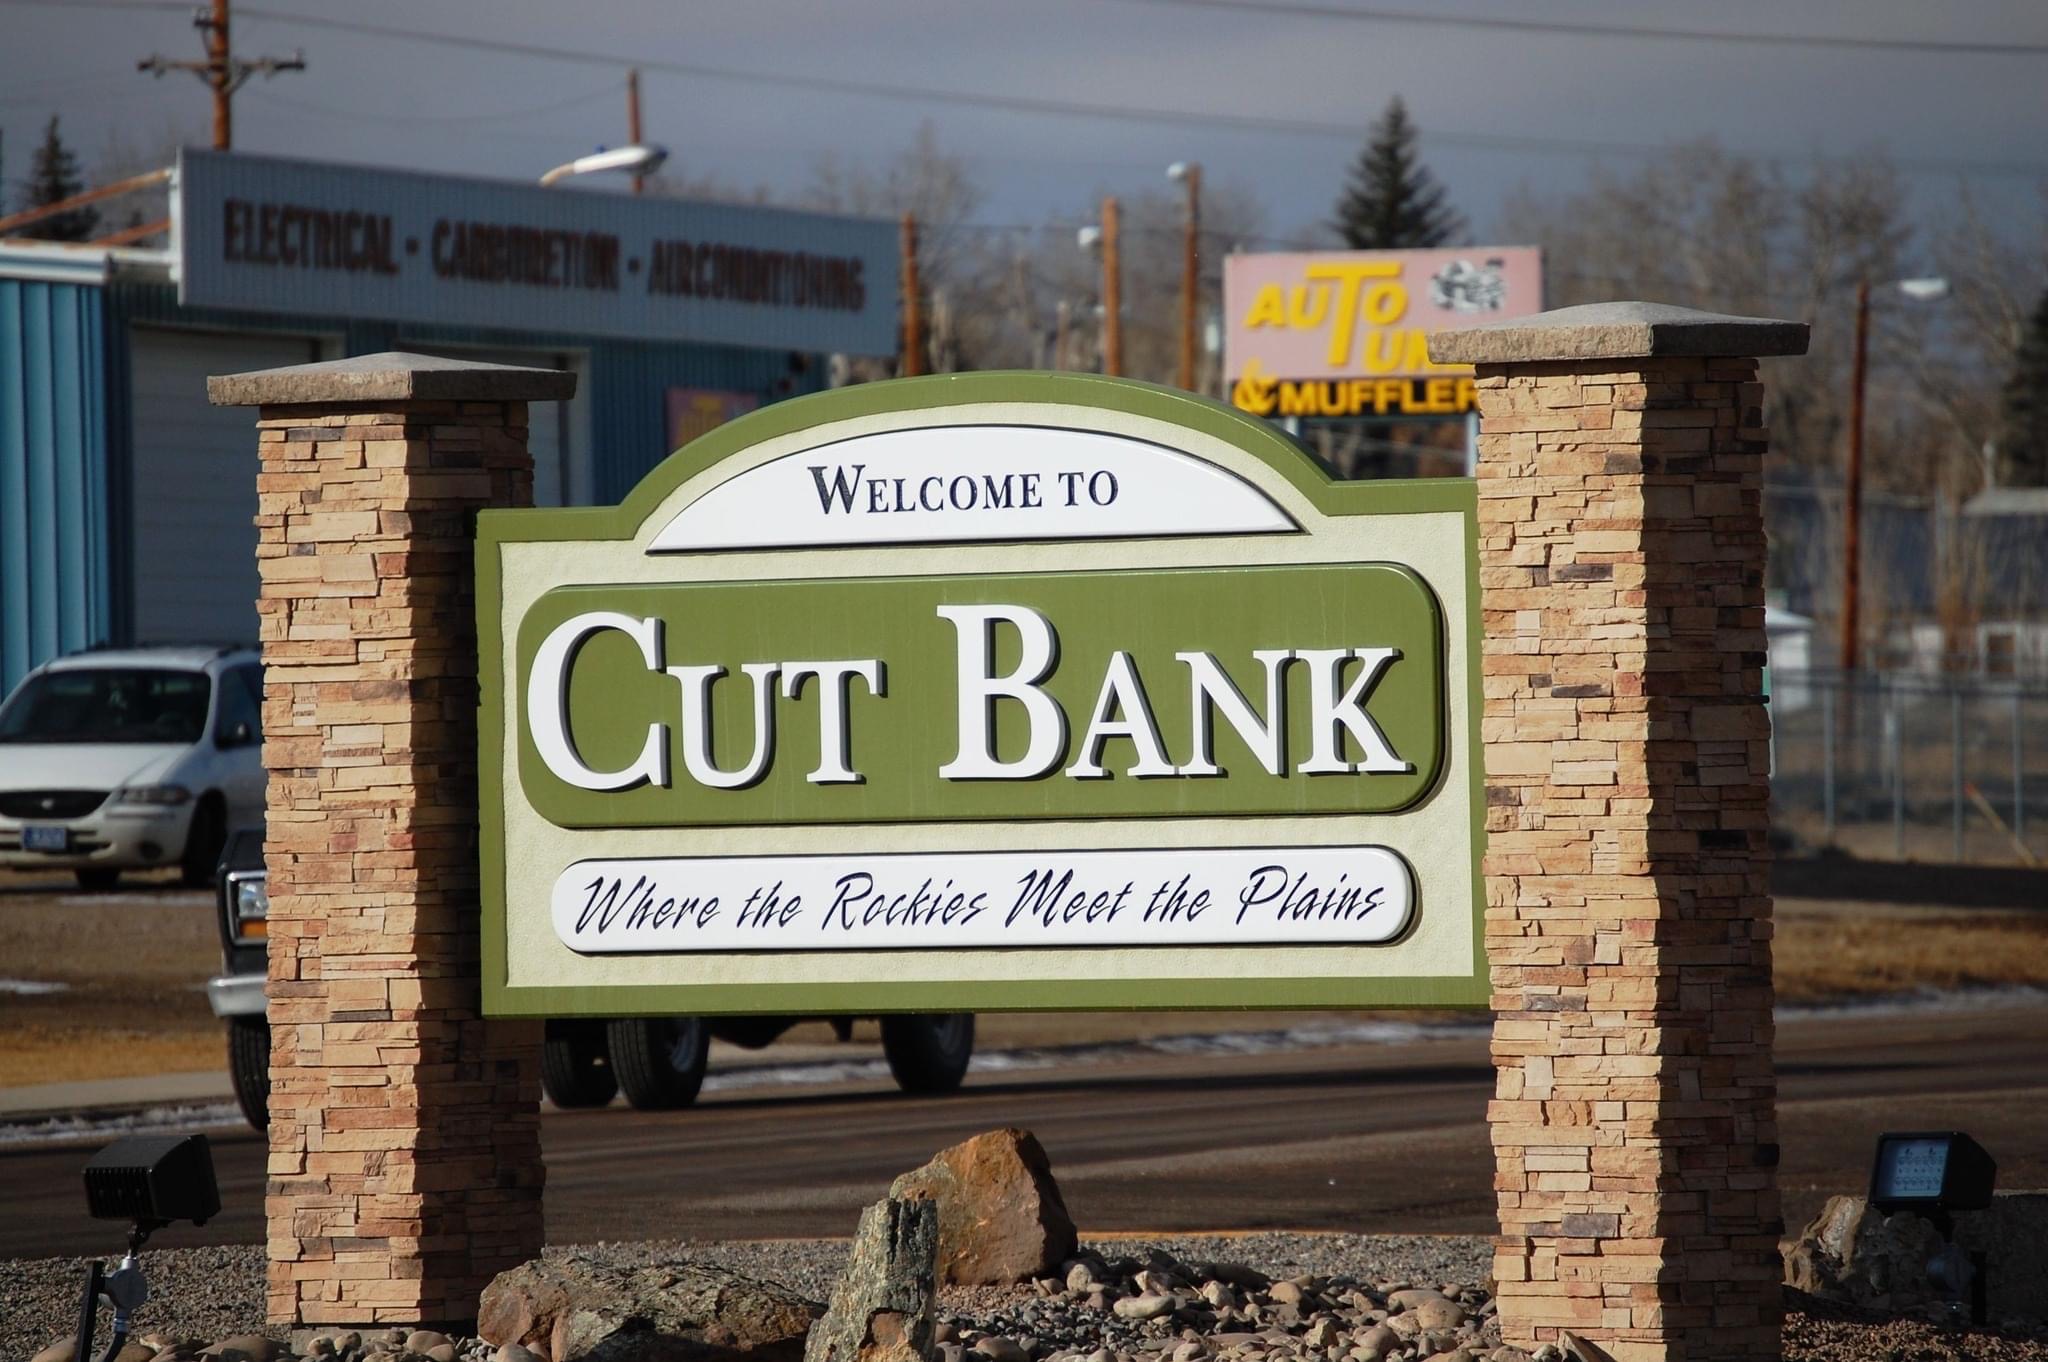 Cut Bank Welcome sign.